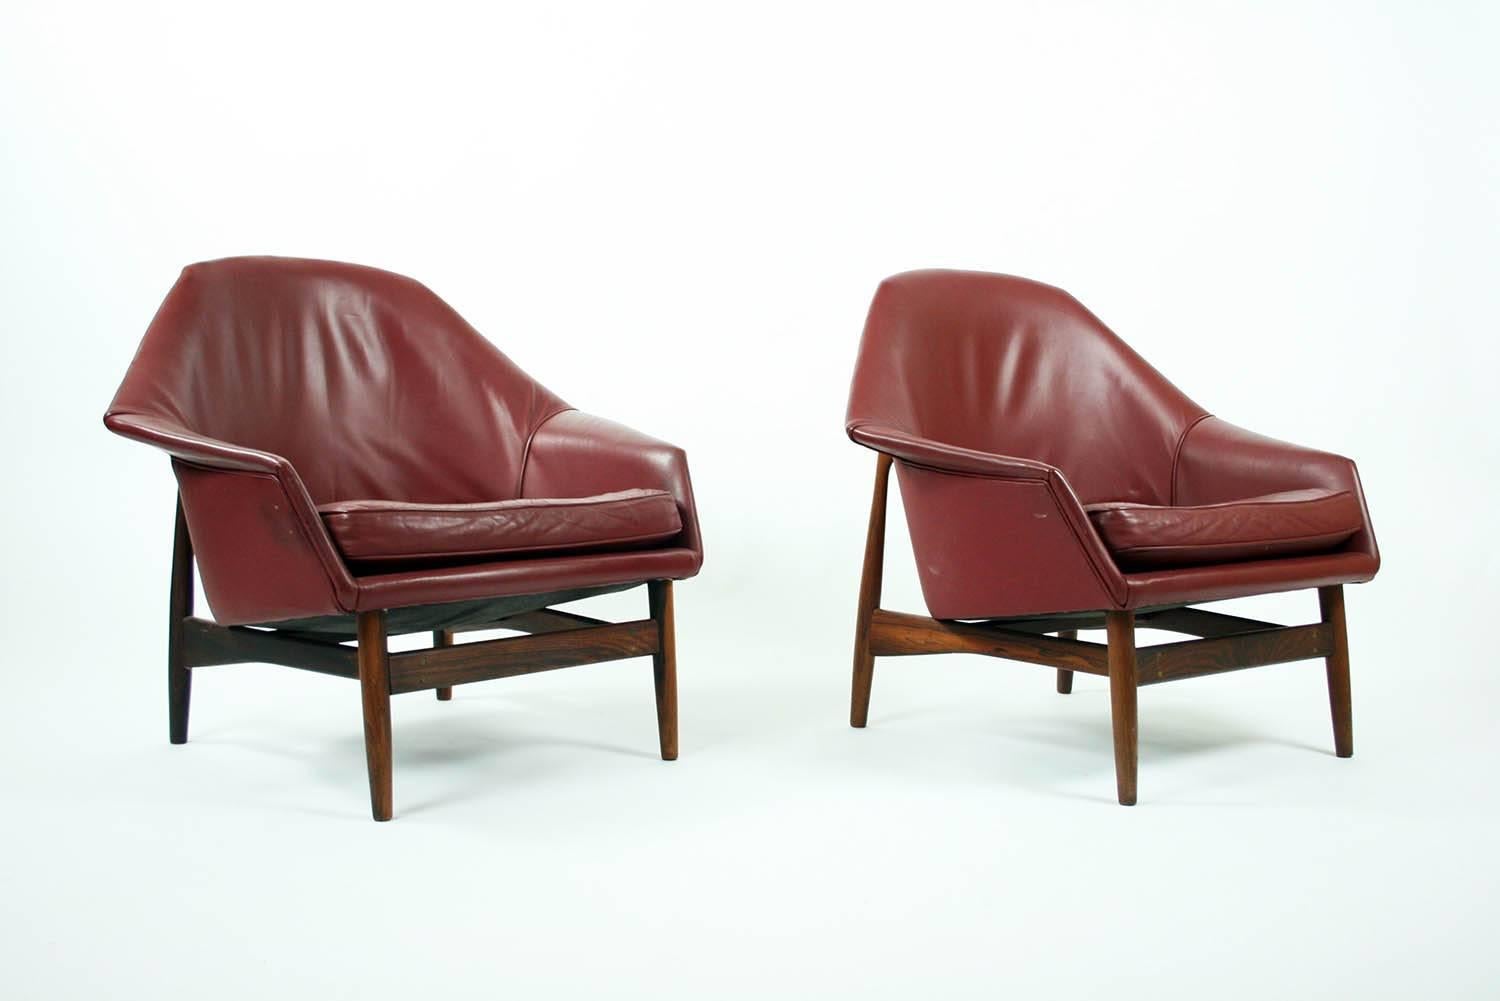 Two sculptural rosewood and leather lounge chairs designed by IB Kofod Larsen for Carlo Gahrn, Denmark. Chairs and in very good condition and very comfortable. The design is documented 1957 in Danish magazine "Mobilia".